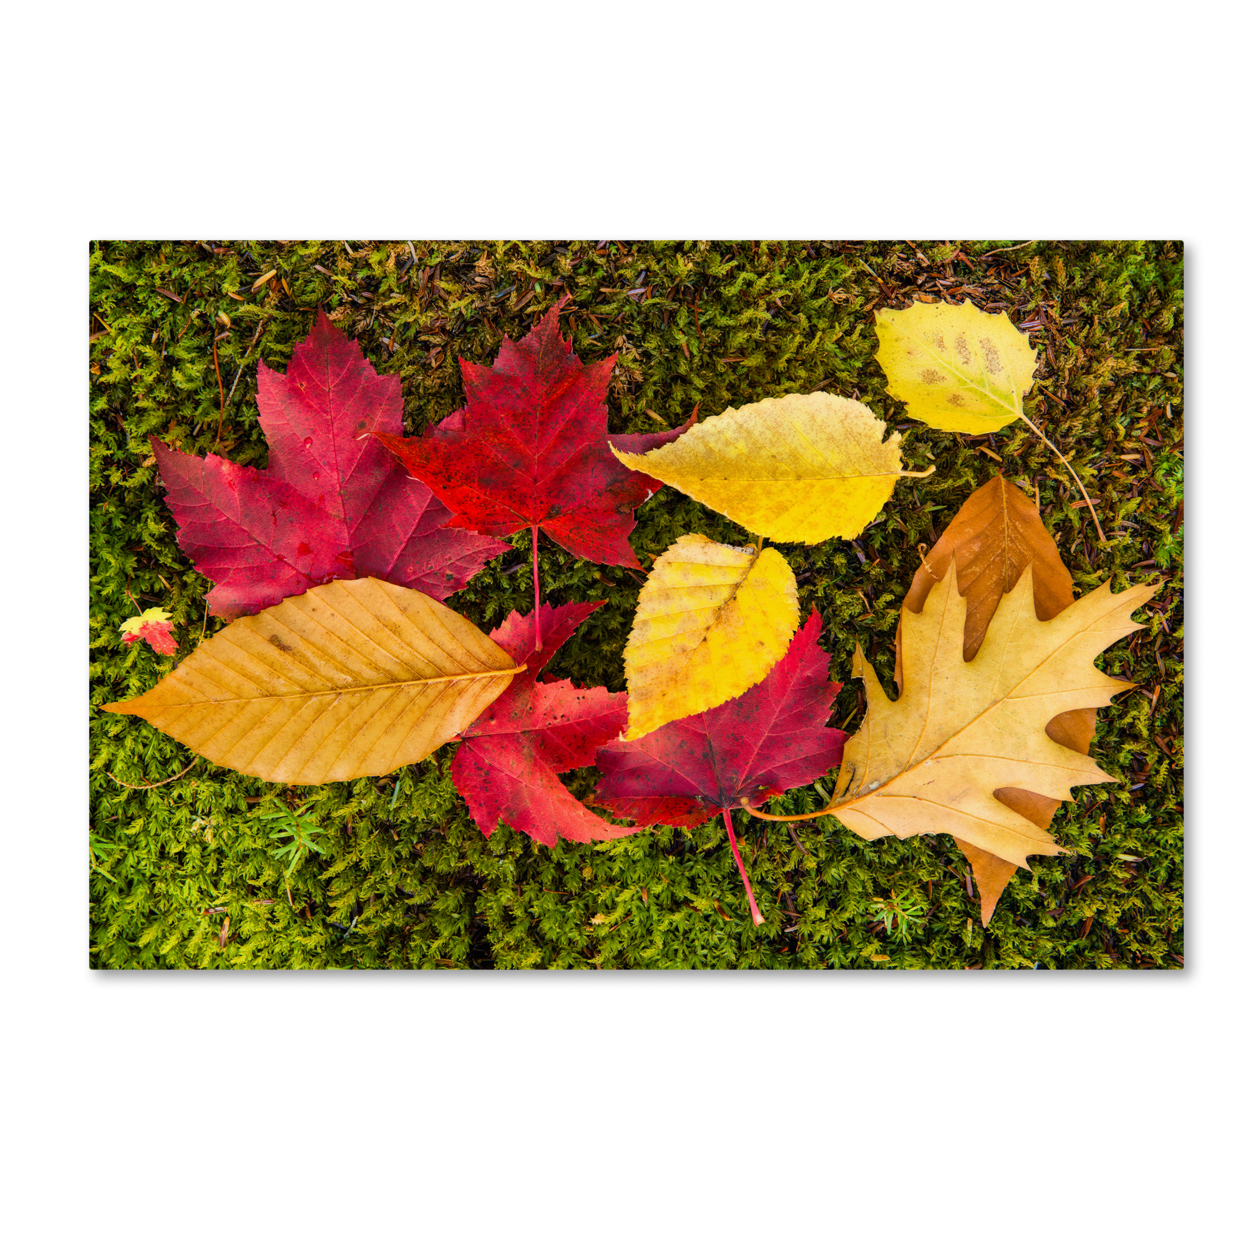 Michael Blanchette Photography 'Leaves On Moss' Canvas Art 16 X 24